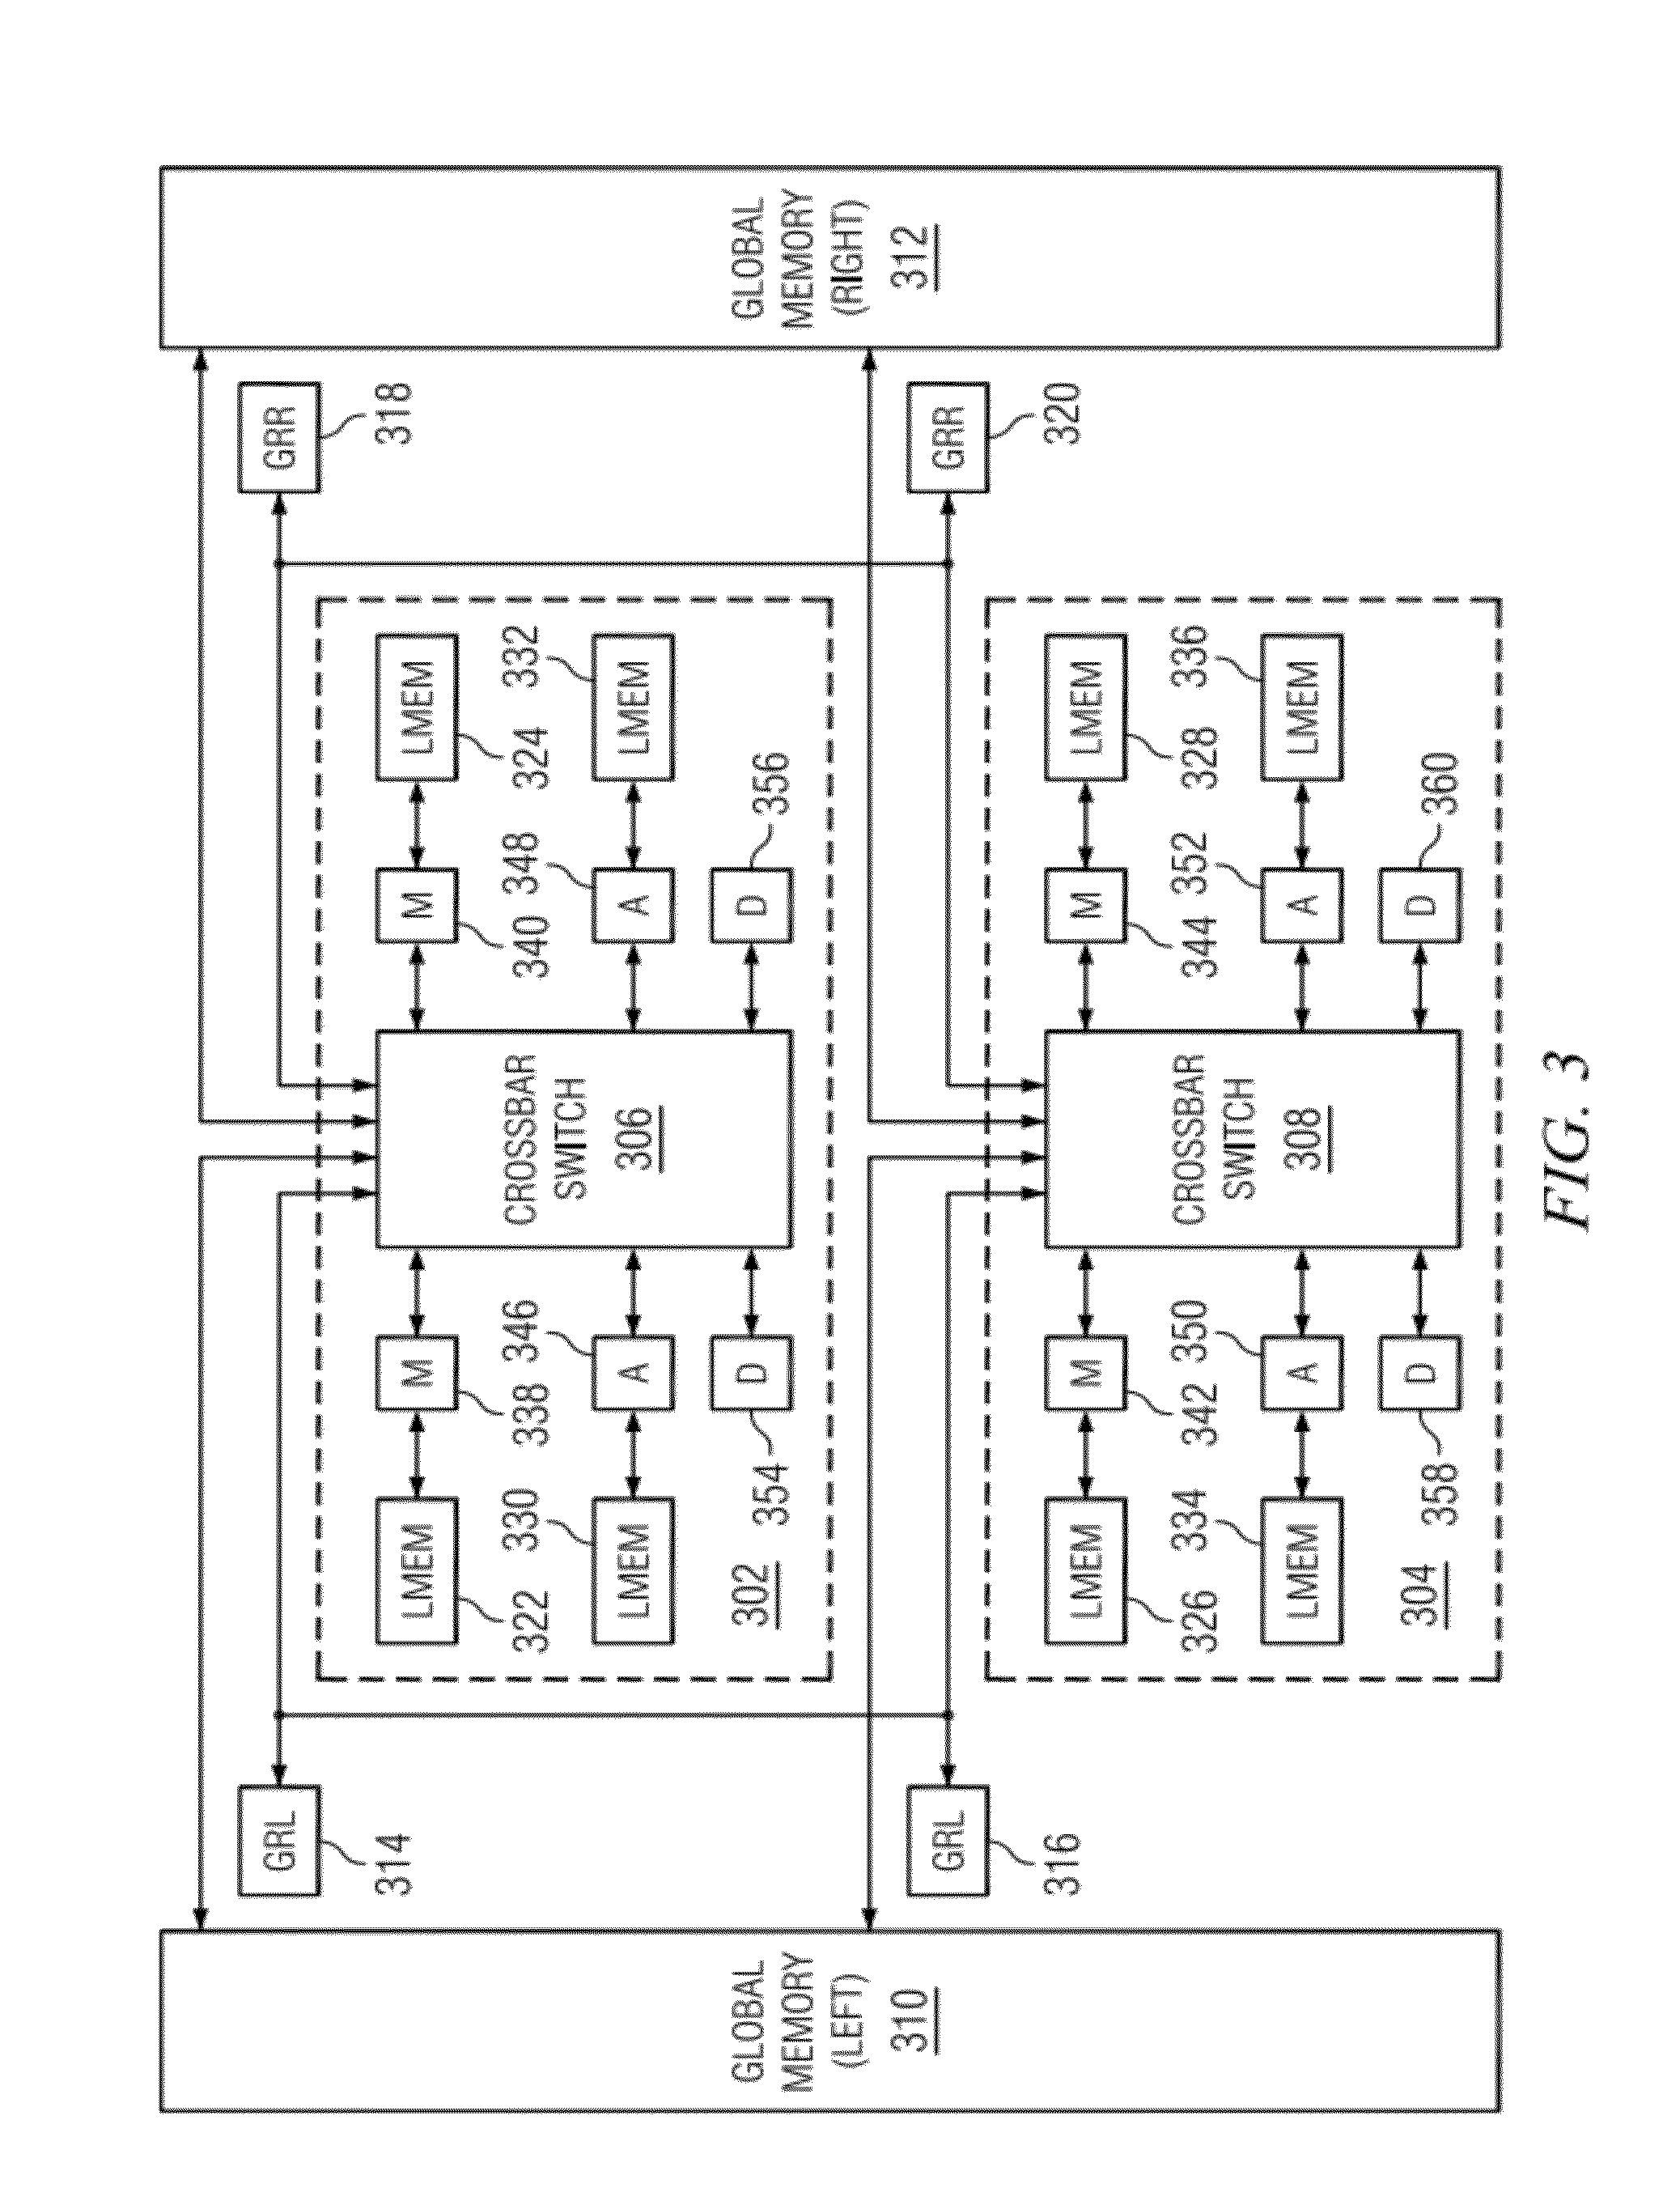 Method and system for decoding low density parity check codes